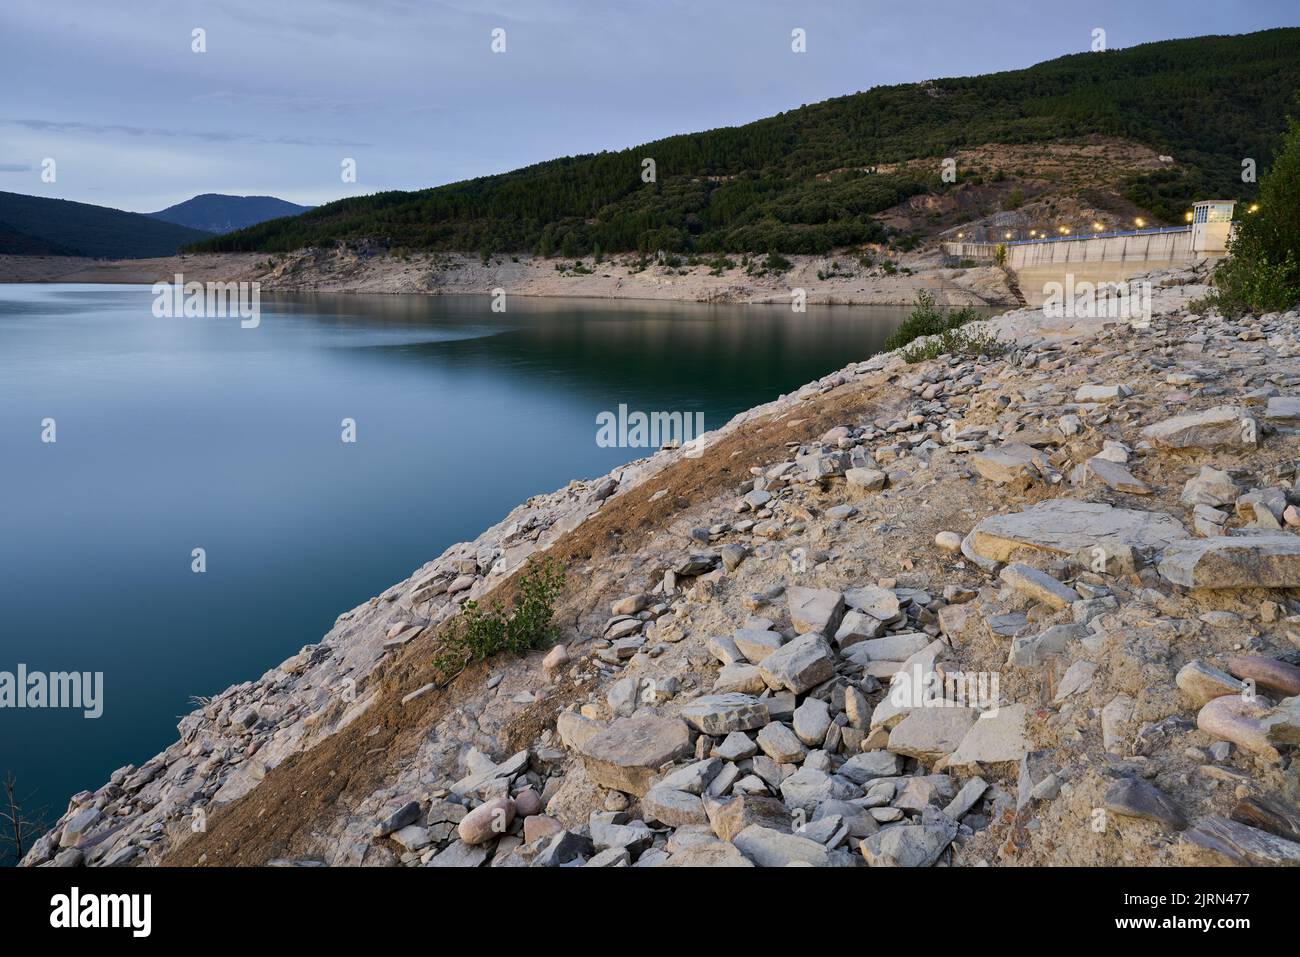 View of the Itoiz reservoir in Navarra, very empty due to the summer drought. High quality photo Stock Photo